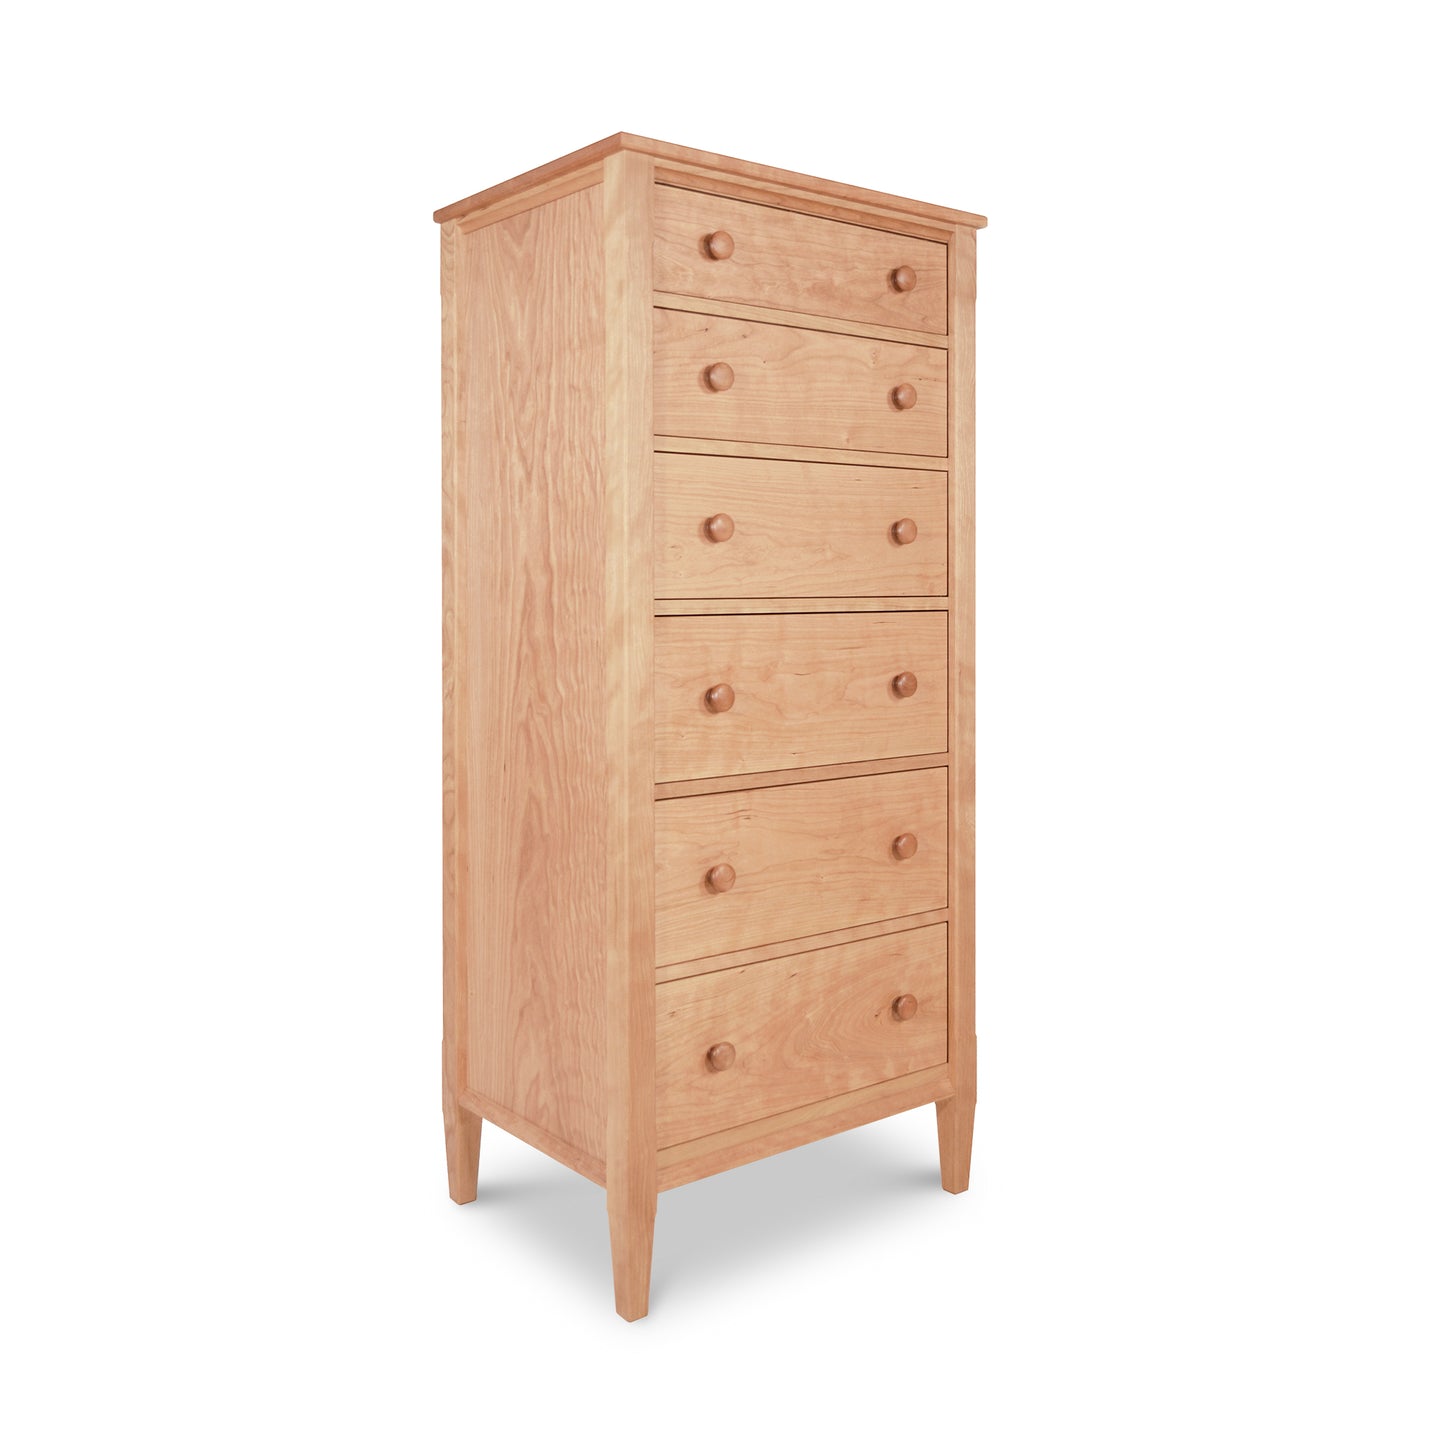 A Vermont-made wooden chest of drawers from the Maple Corner Woodworks Vermont Shaker Lingerie Chest, part of the Vermont Shaker Furniture Collection, on a white background.